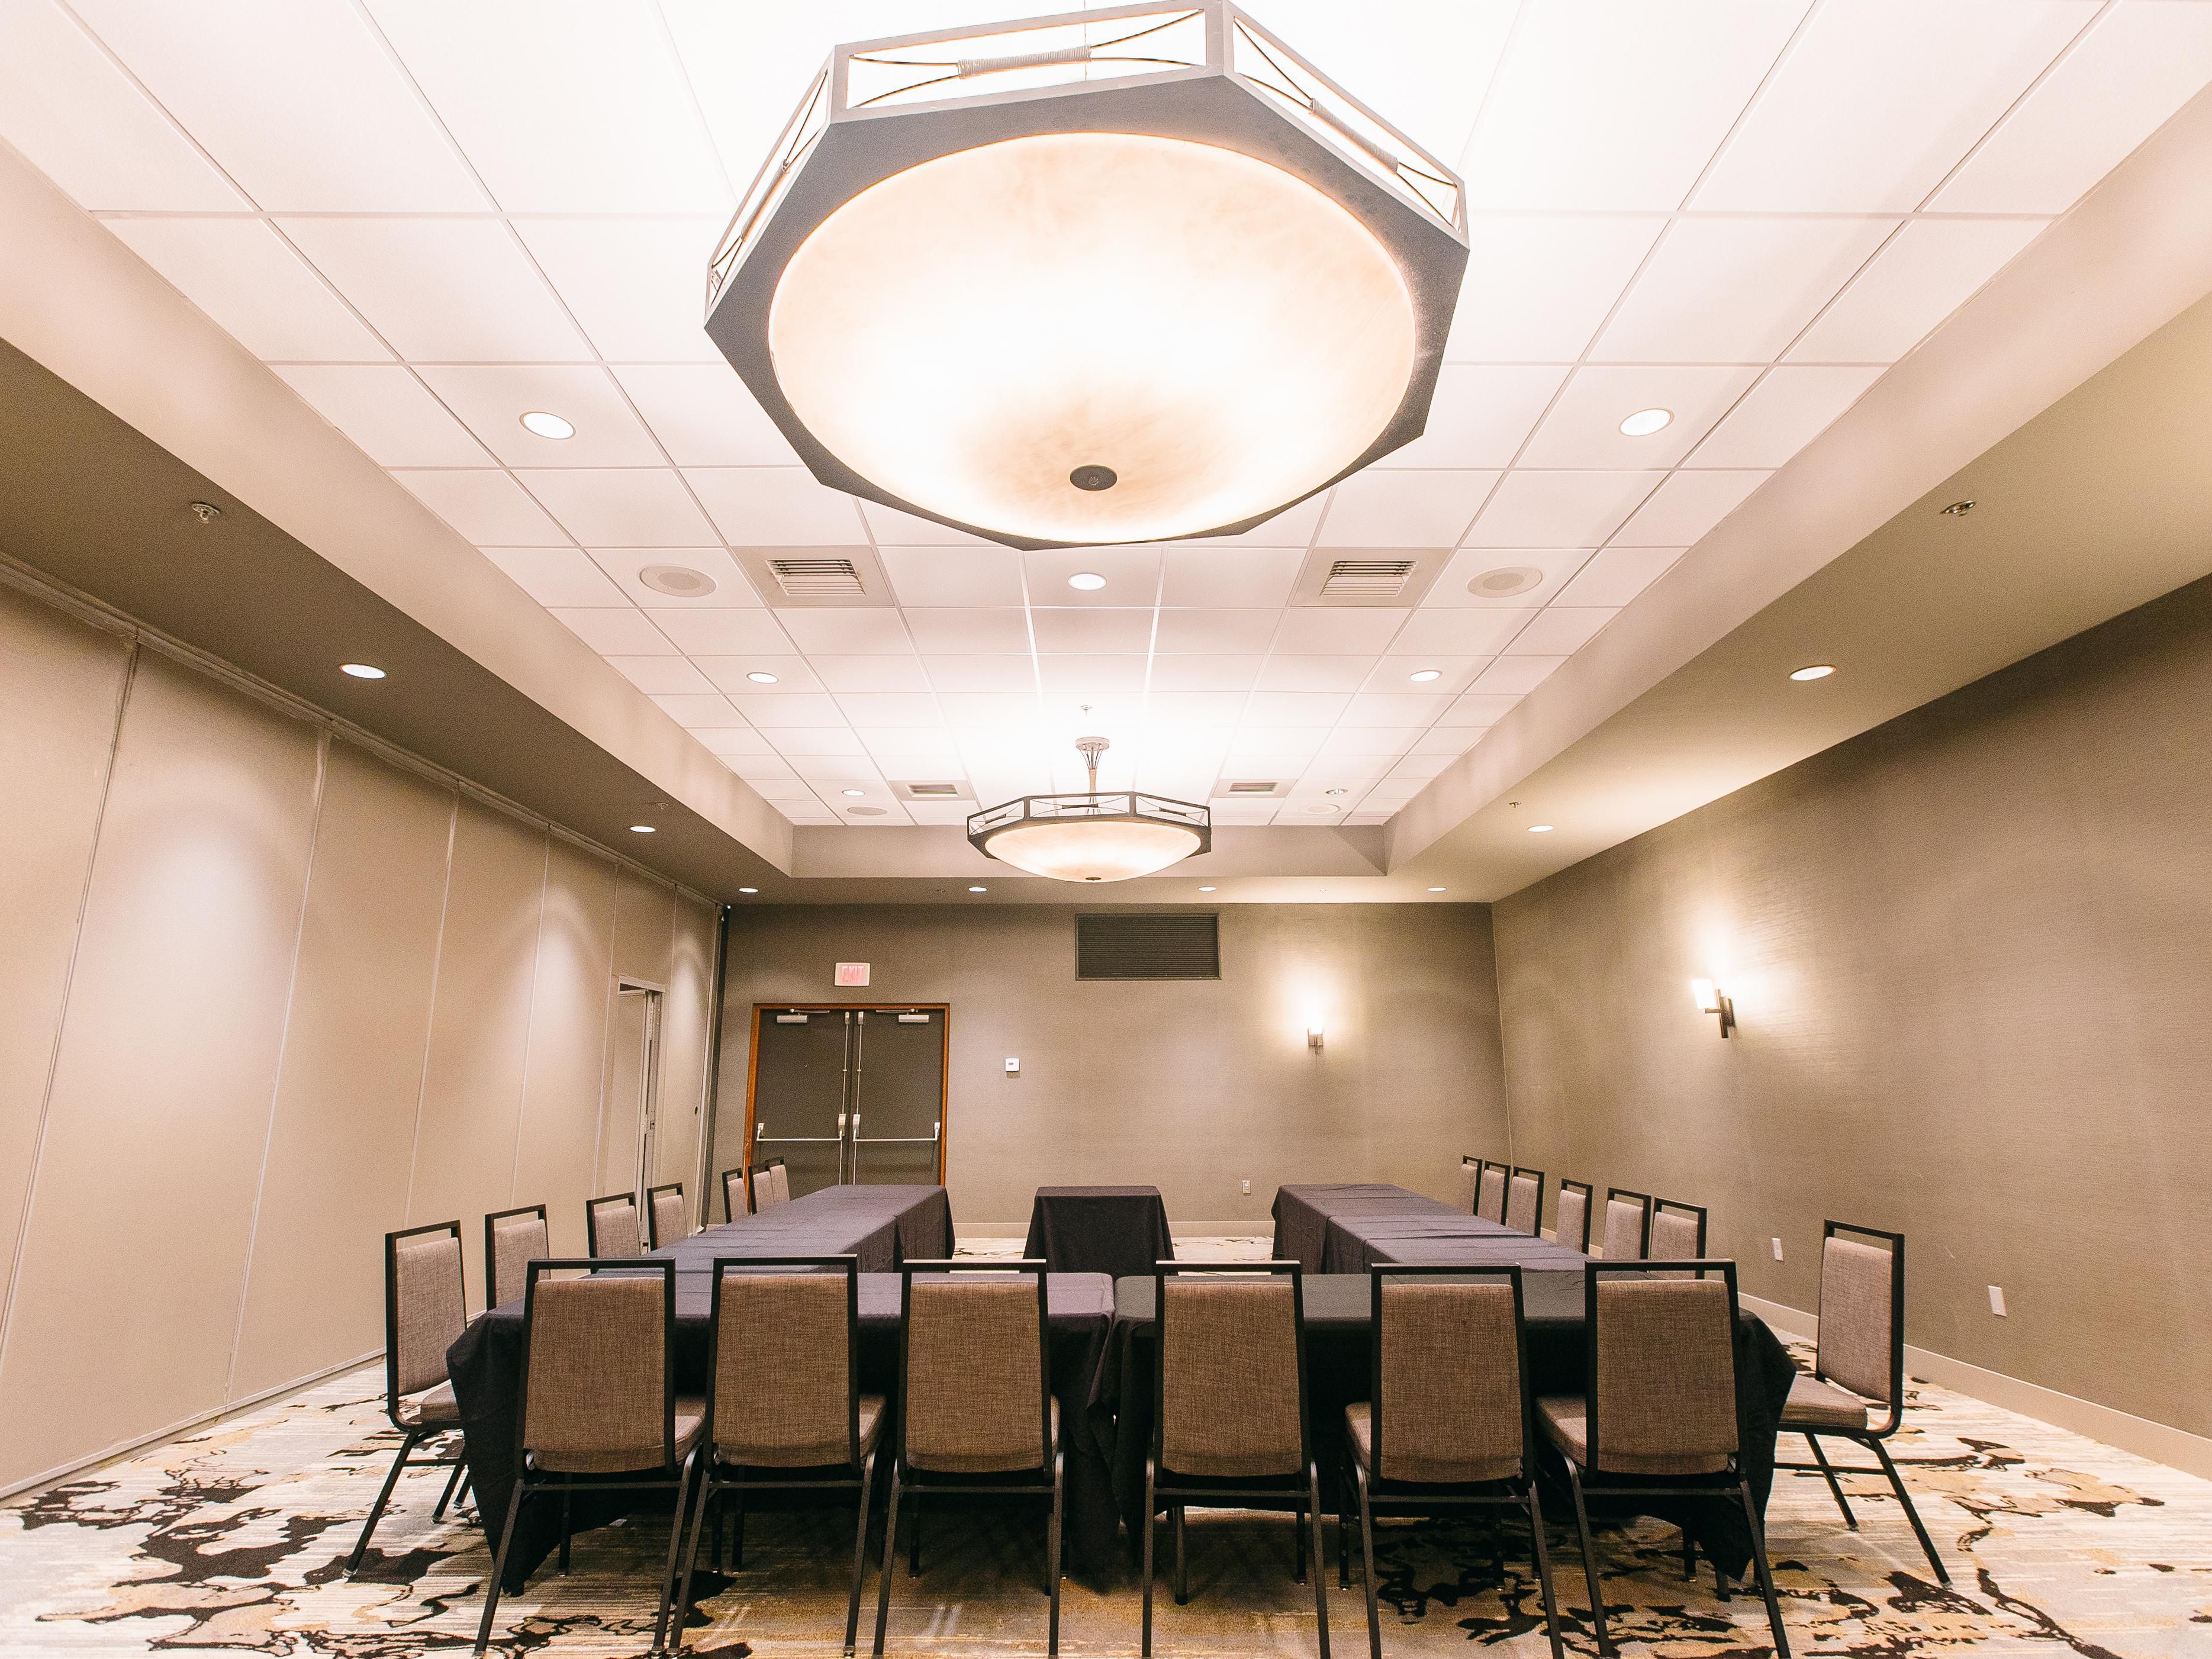 From business meetings to seminars to galas, host your next signature event in our hotel's flexible meeting space. With 10,000 square feet, our conference rooms are  outfitted with audiovisual technology to ensure successful meetings. Our hotel's Meetings Director will help you plan a wonderful event for your guests.